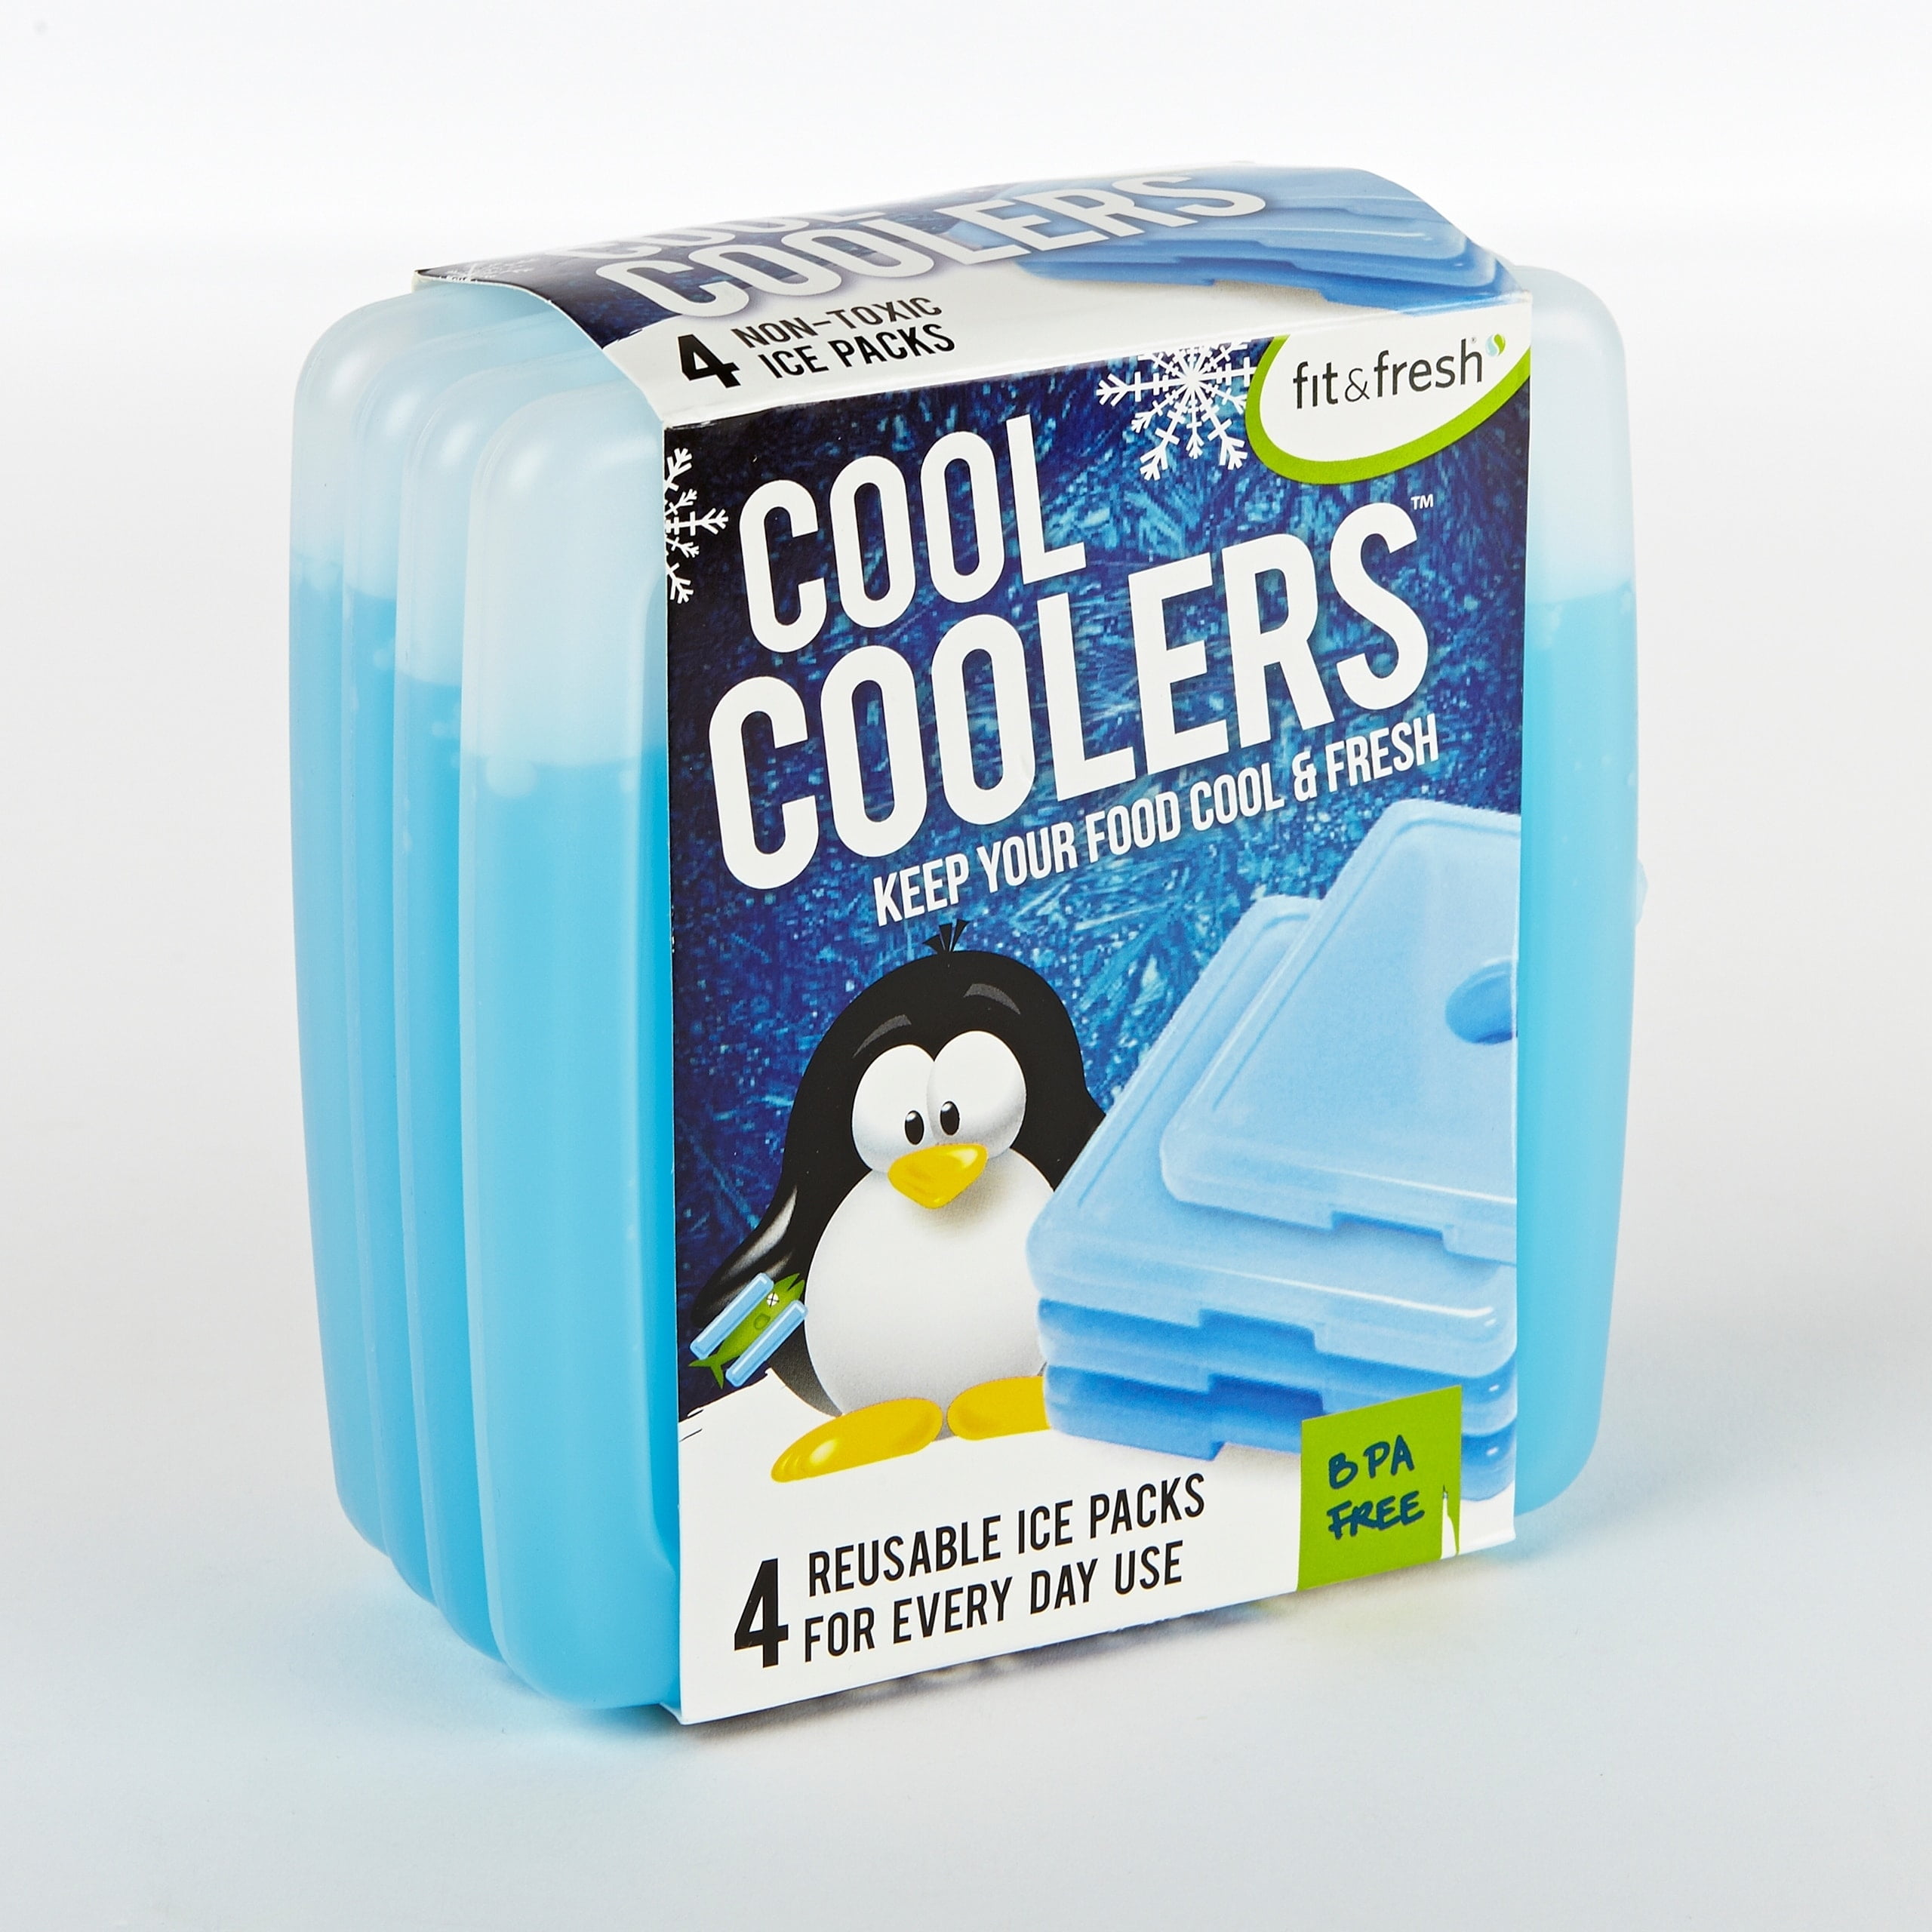 Fit + Fresh Cool Coolers Ice Packs